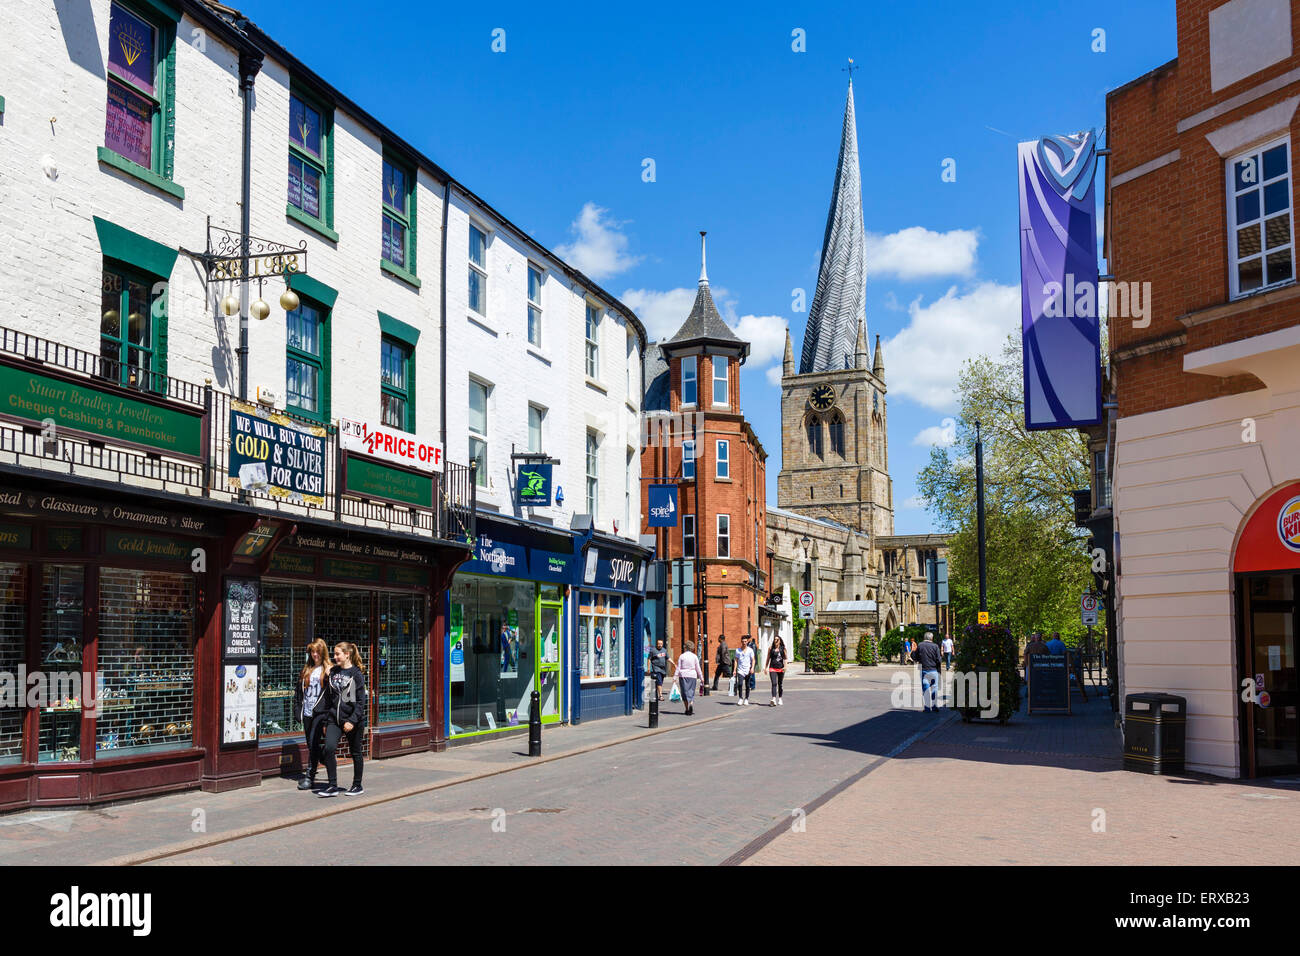 Burlington St in town centre looking towards Church of St Mary & All Saints with its Crooked Spire, Chesterfield, Derbyshire, UK Stock Photo